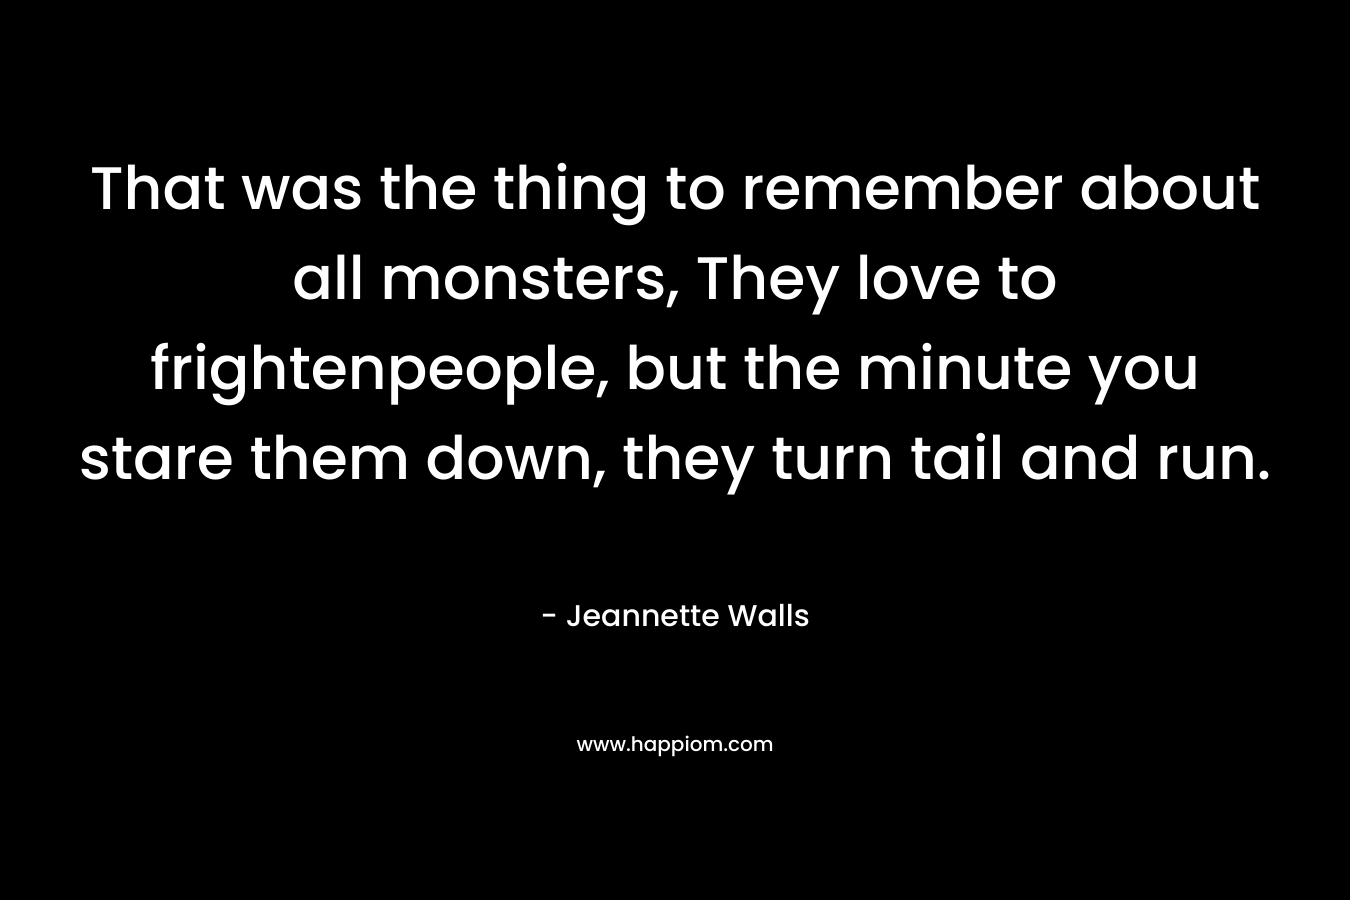 That was the thing to remember about all monsters, They love to frightenpeople, but the minute you stare them down, they turn tail and run.